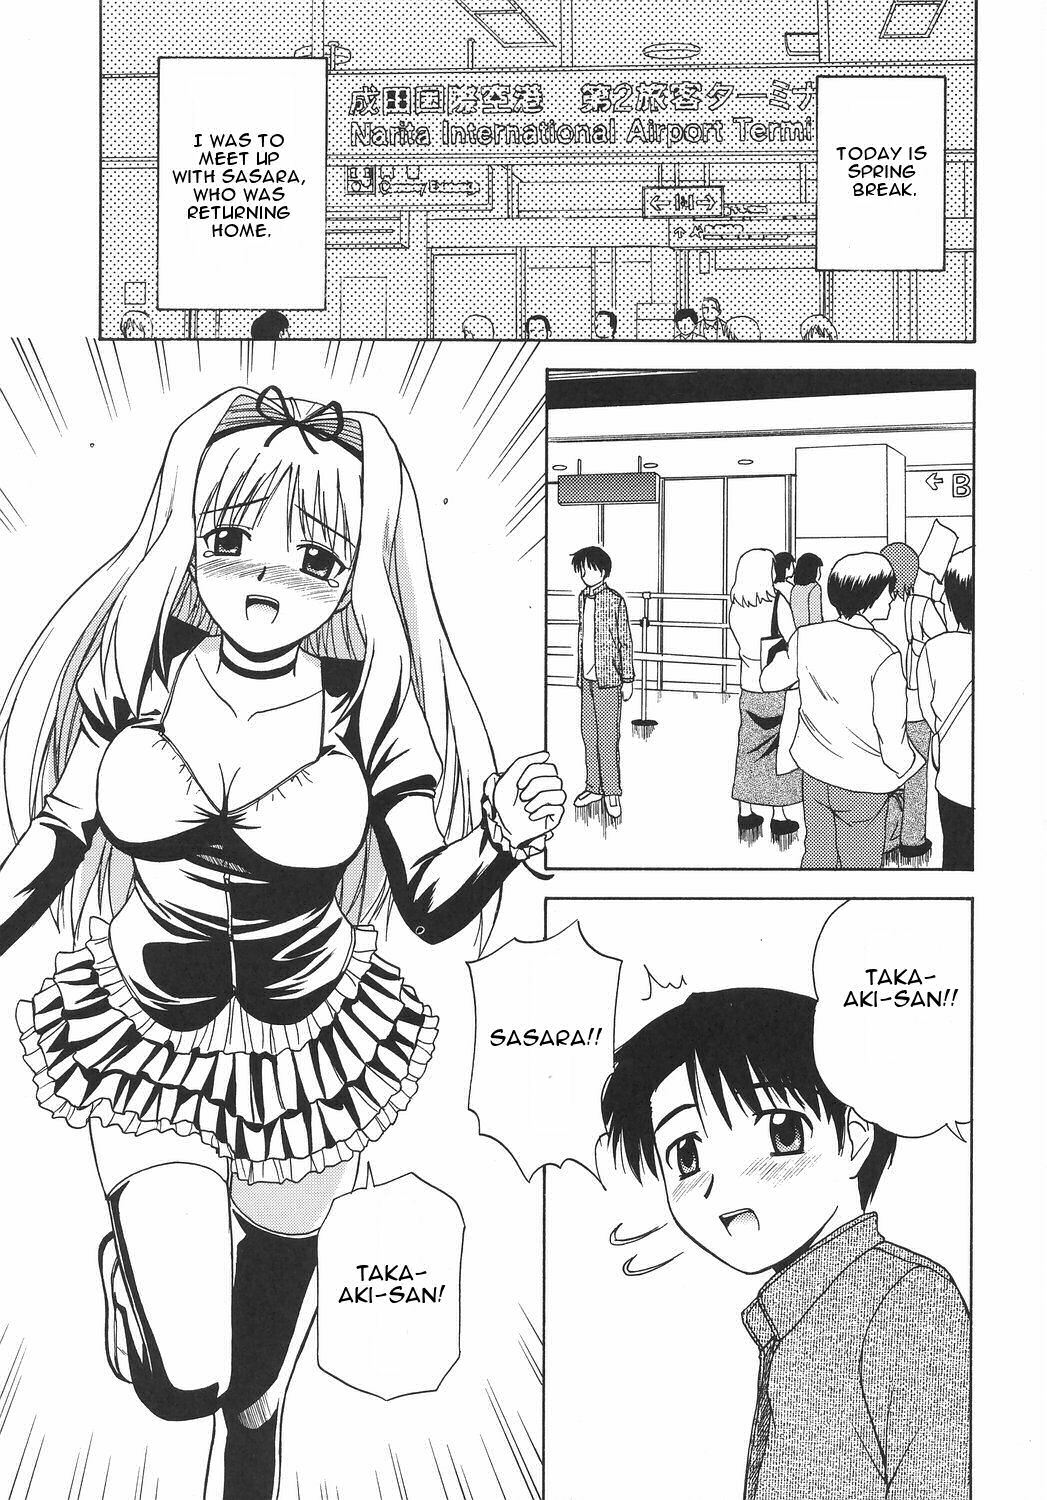 (SC31) [G-SCAN CORP. (Satou Chagashi)] Sa-ryan to Issho (ToHeart2) [English] [One Of A Kind Productions] page 2 full